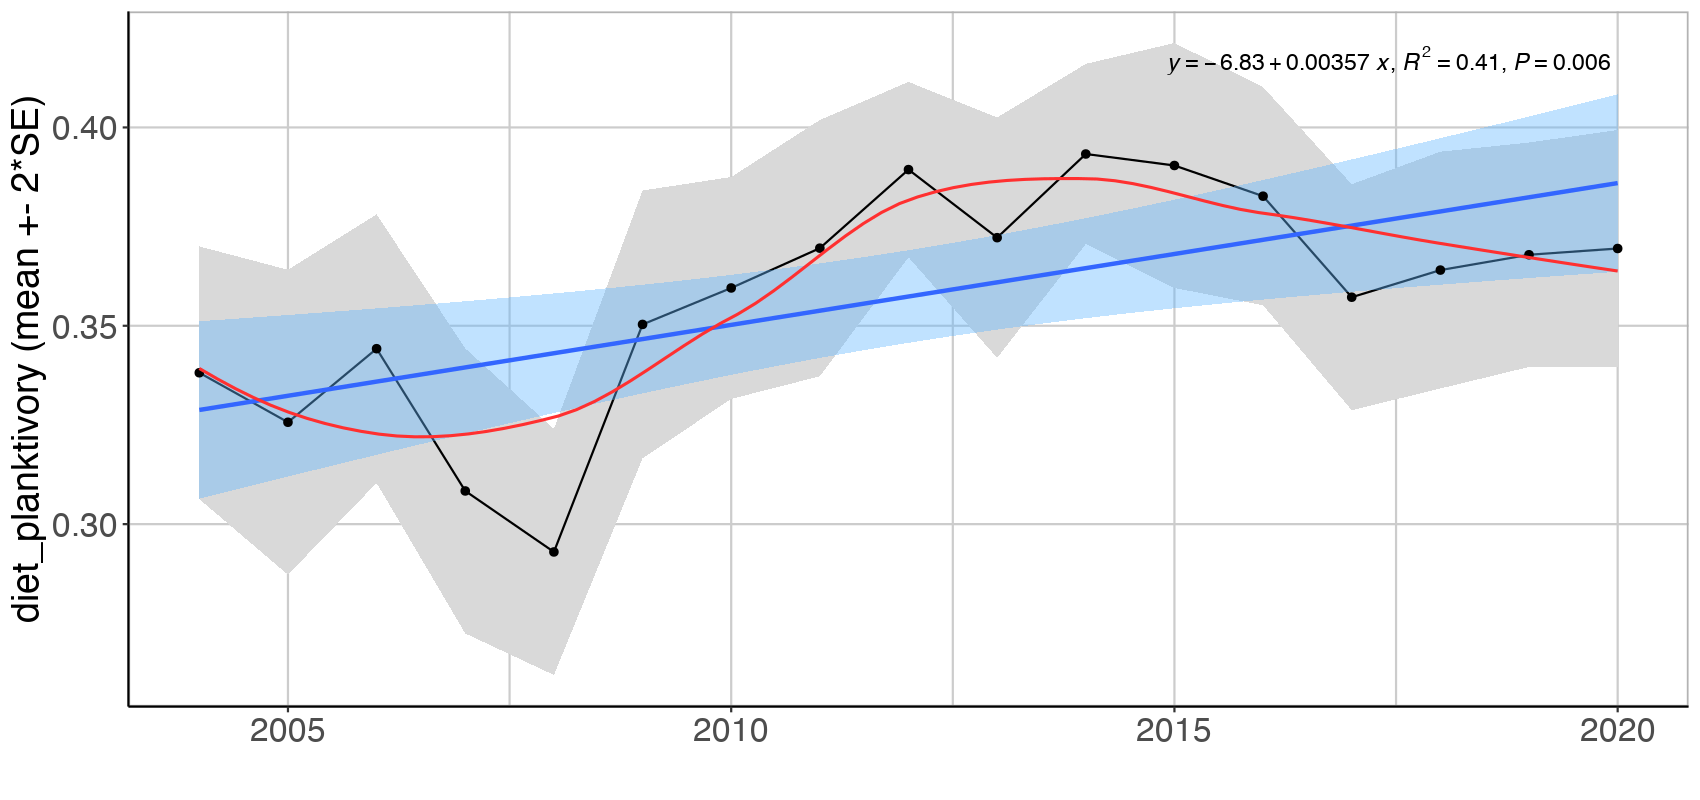 Figure S.3.1 Mean ( ± 2*SE) biomass proportion of three feeding guilds in the Sub-Arctic Barents Sea (Black dots and grey shading). Linear regression fit with 95% CI is shown in blue, and the statistical results are given in the top of each plot. A local smoother is added in red to assist visual interpretation of non-linear changes during the period